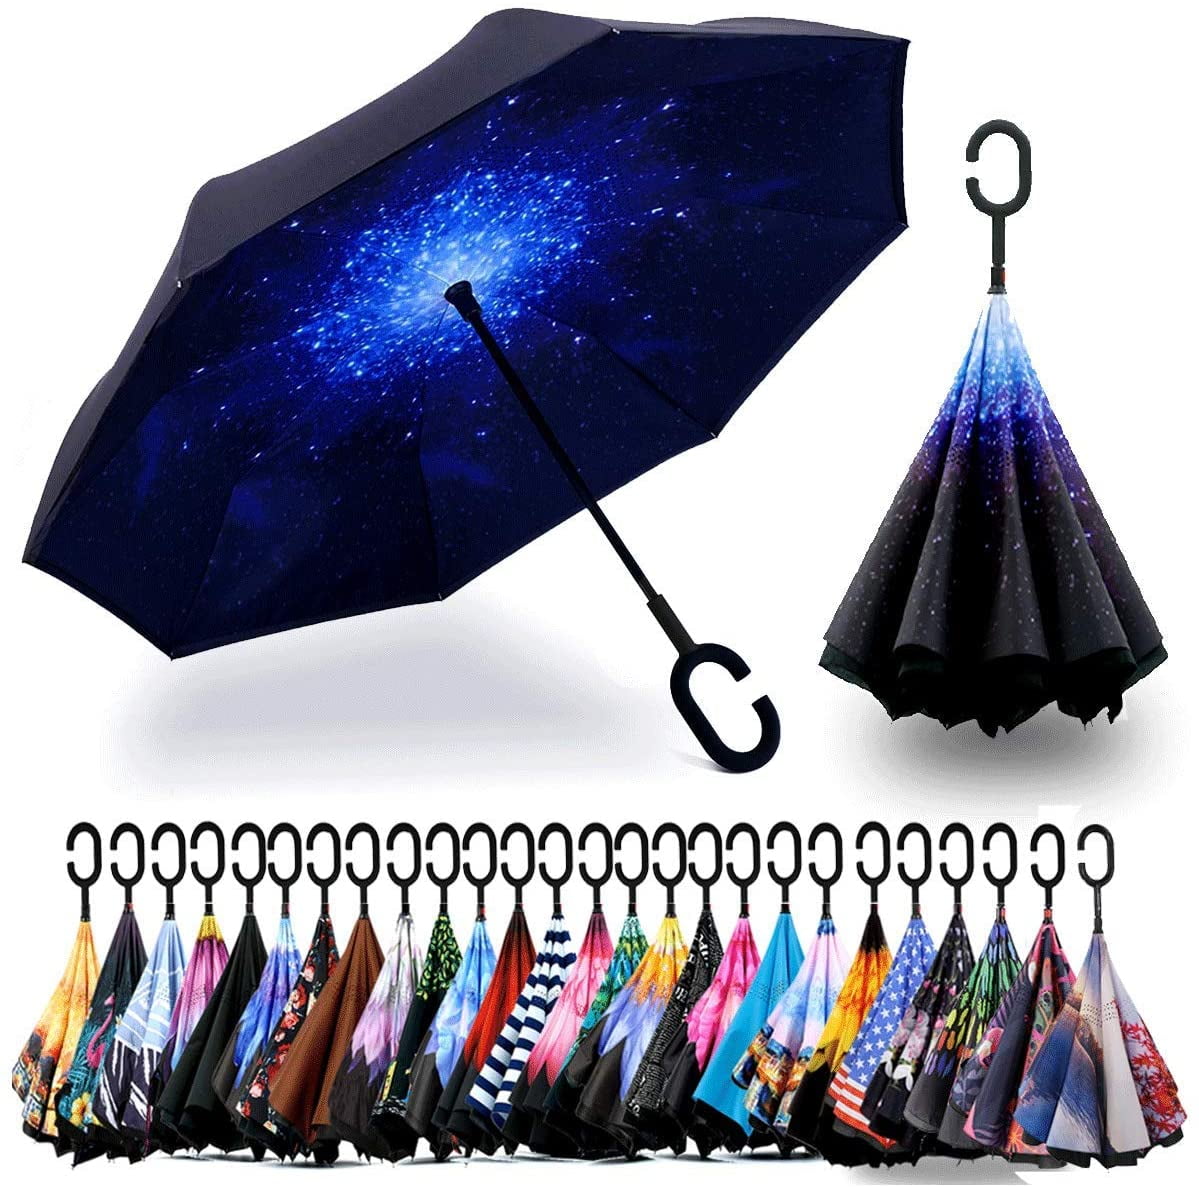 ZOMAKE Double Layer Inverted Umbrellas for Women Reverse Folding Umbrella Windproof UV Protection Big Straight Umbrella for Car Rain Outdoor with C-Shaped Handle 